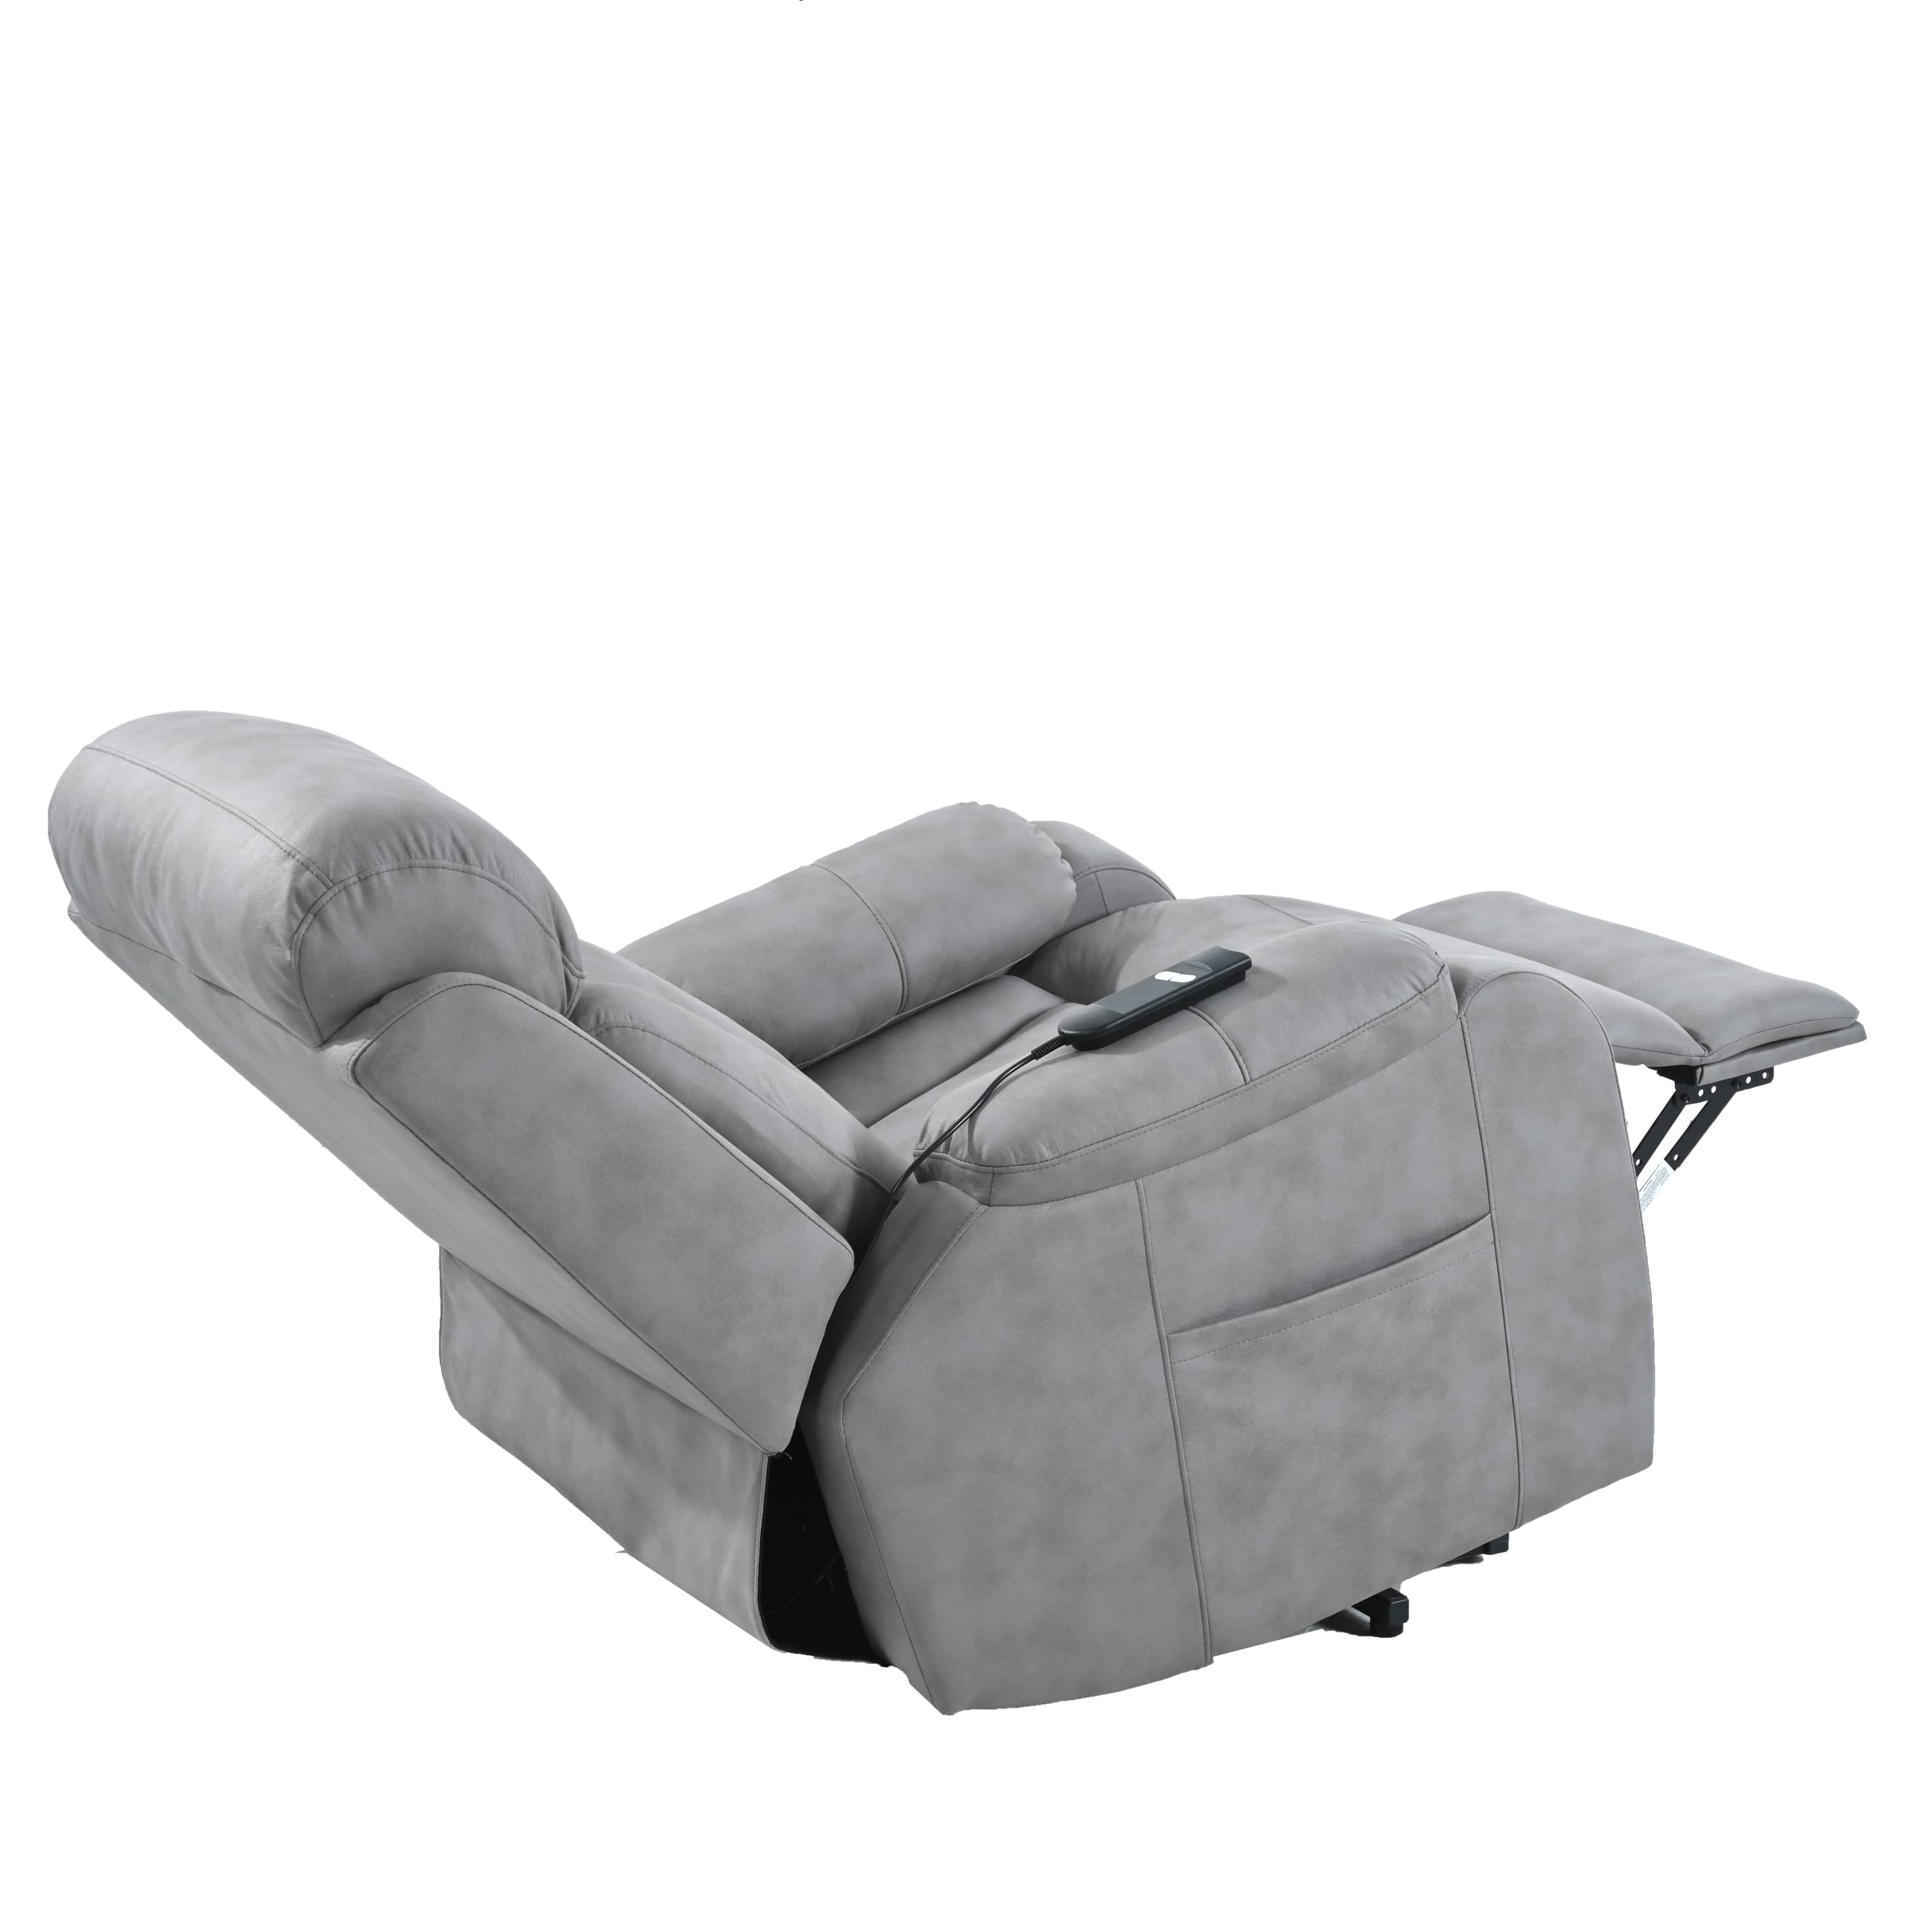 Light Gray Power Lift Chair Right Side Profile with Headrest and Footrest Extended